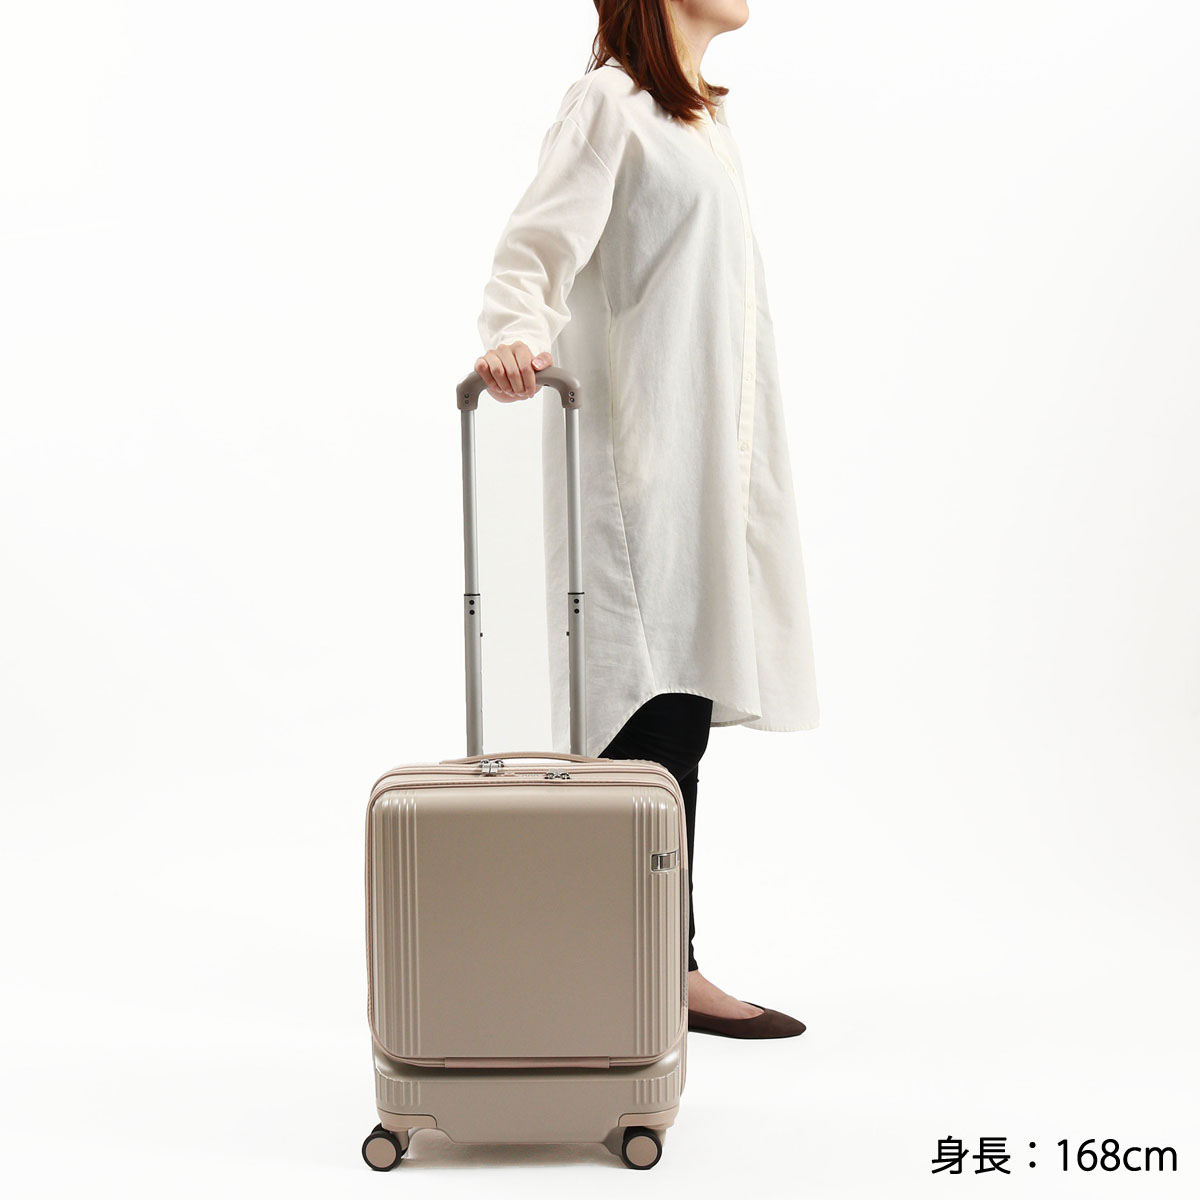  maximum 41%*6/2 limitation 5 year guarantee Ace to-kyo- Carry case machine inside bringing in S front open ace.TOKYO suitcase 40L fur knitted Z Finntasia 05321